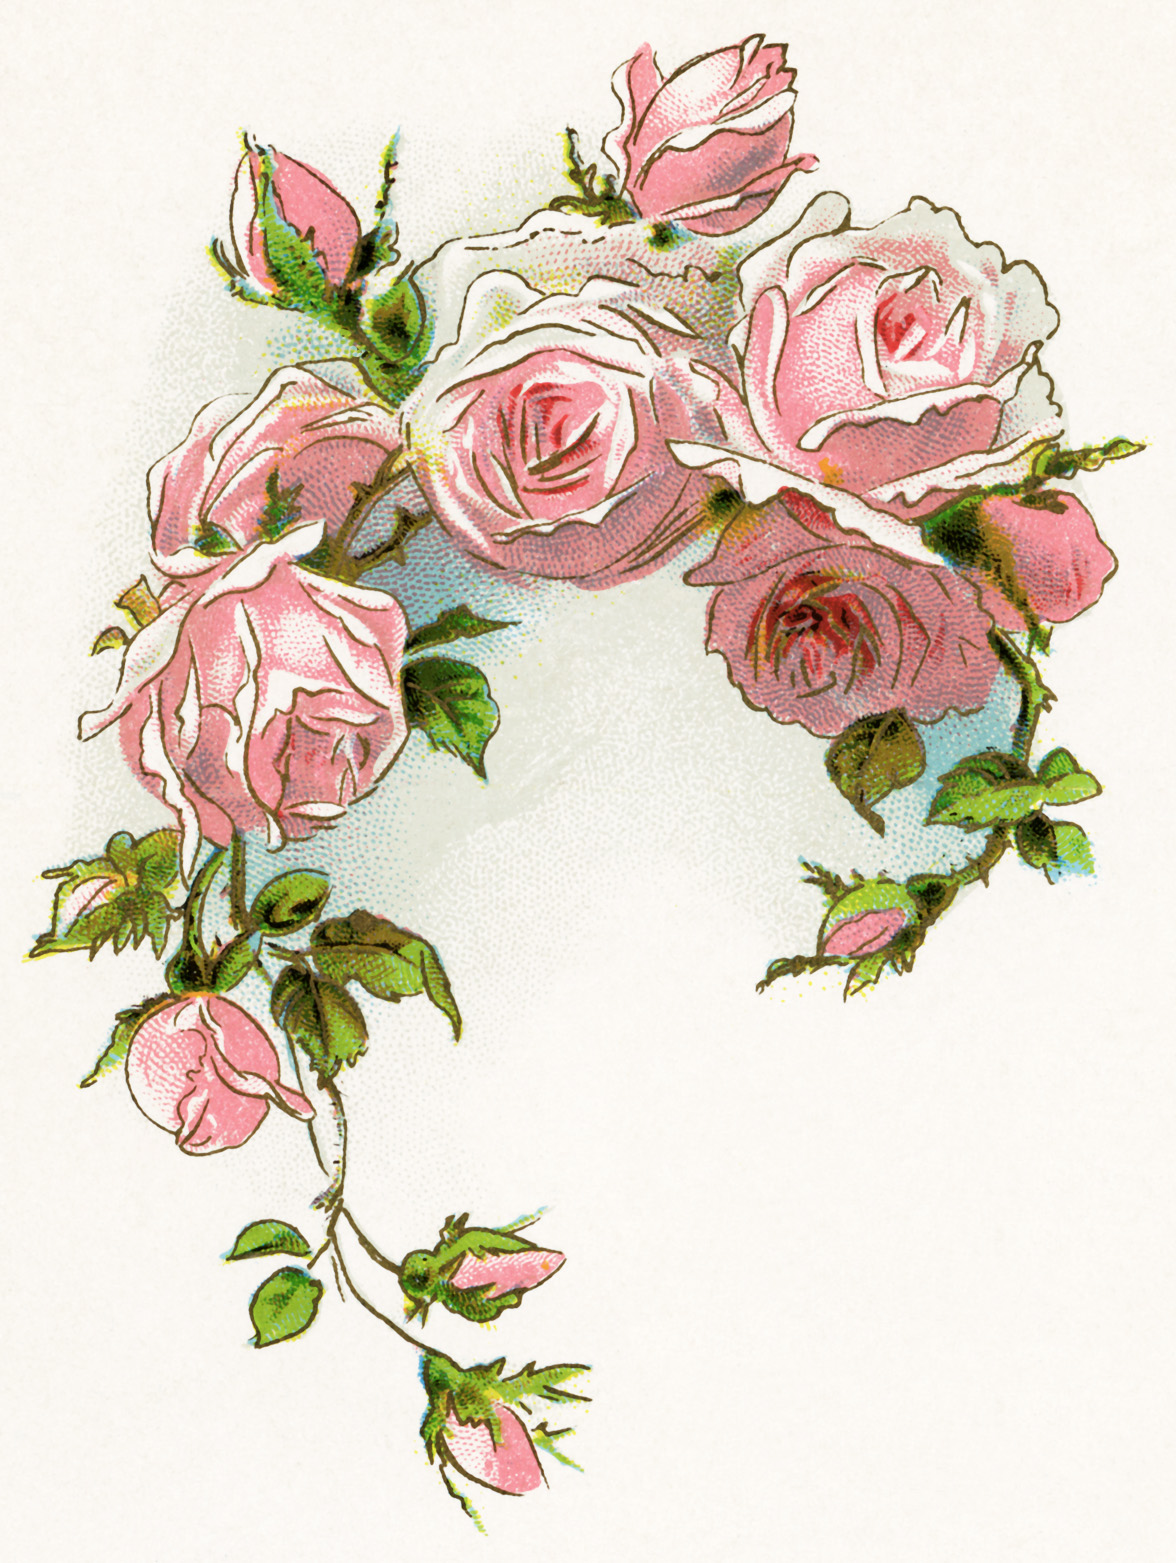 Clipart images of old fashioned roses.